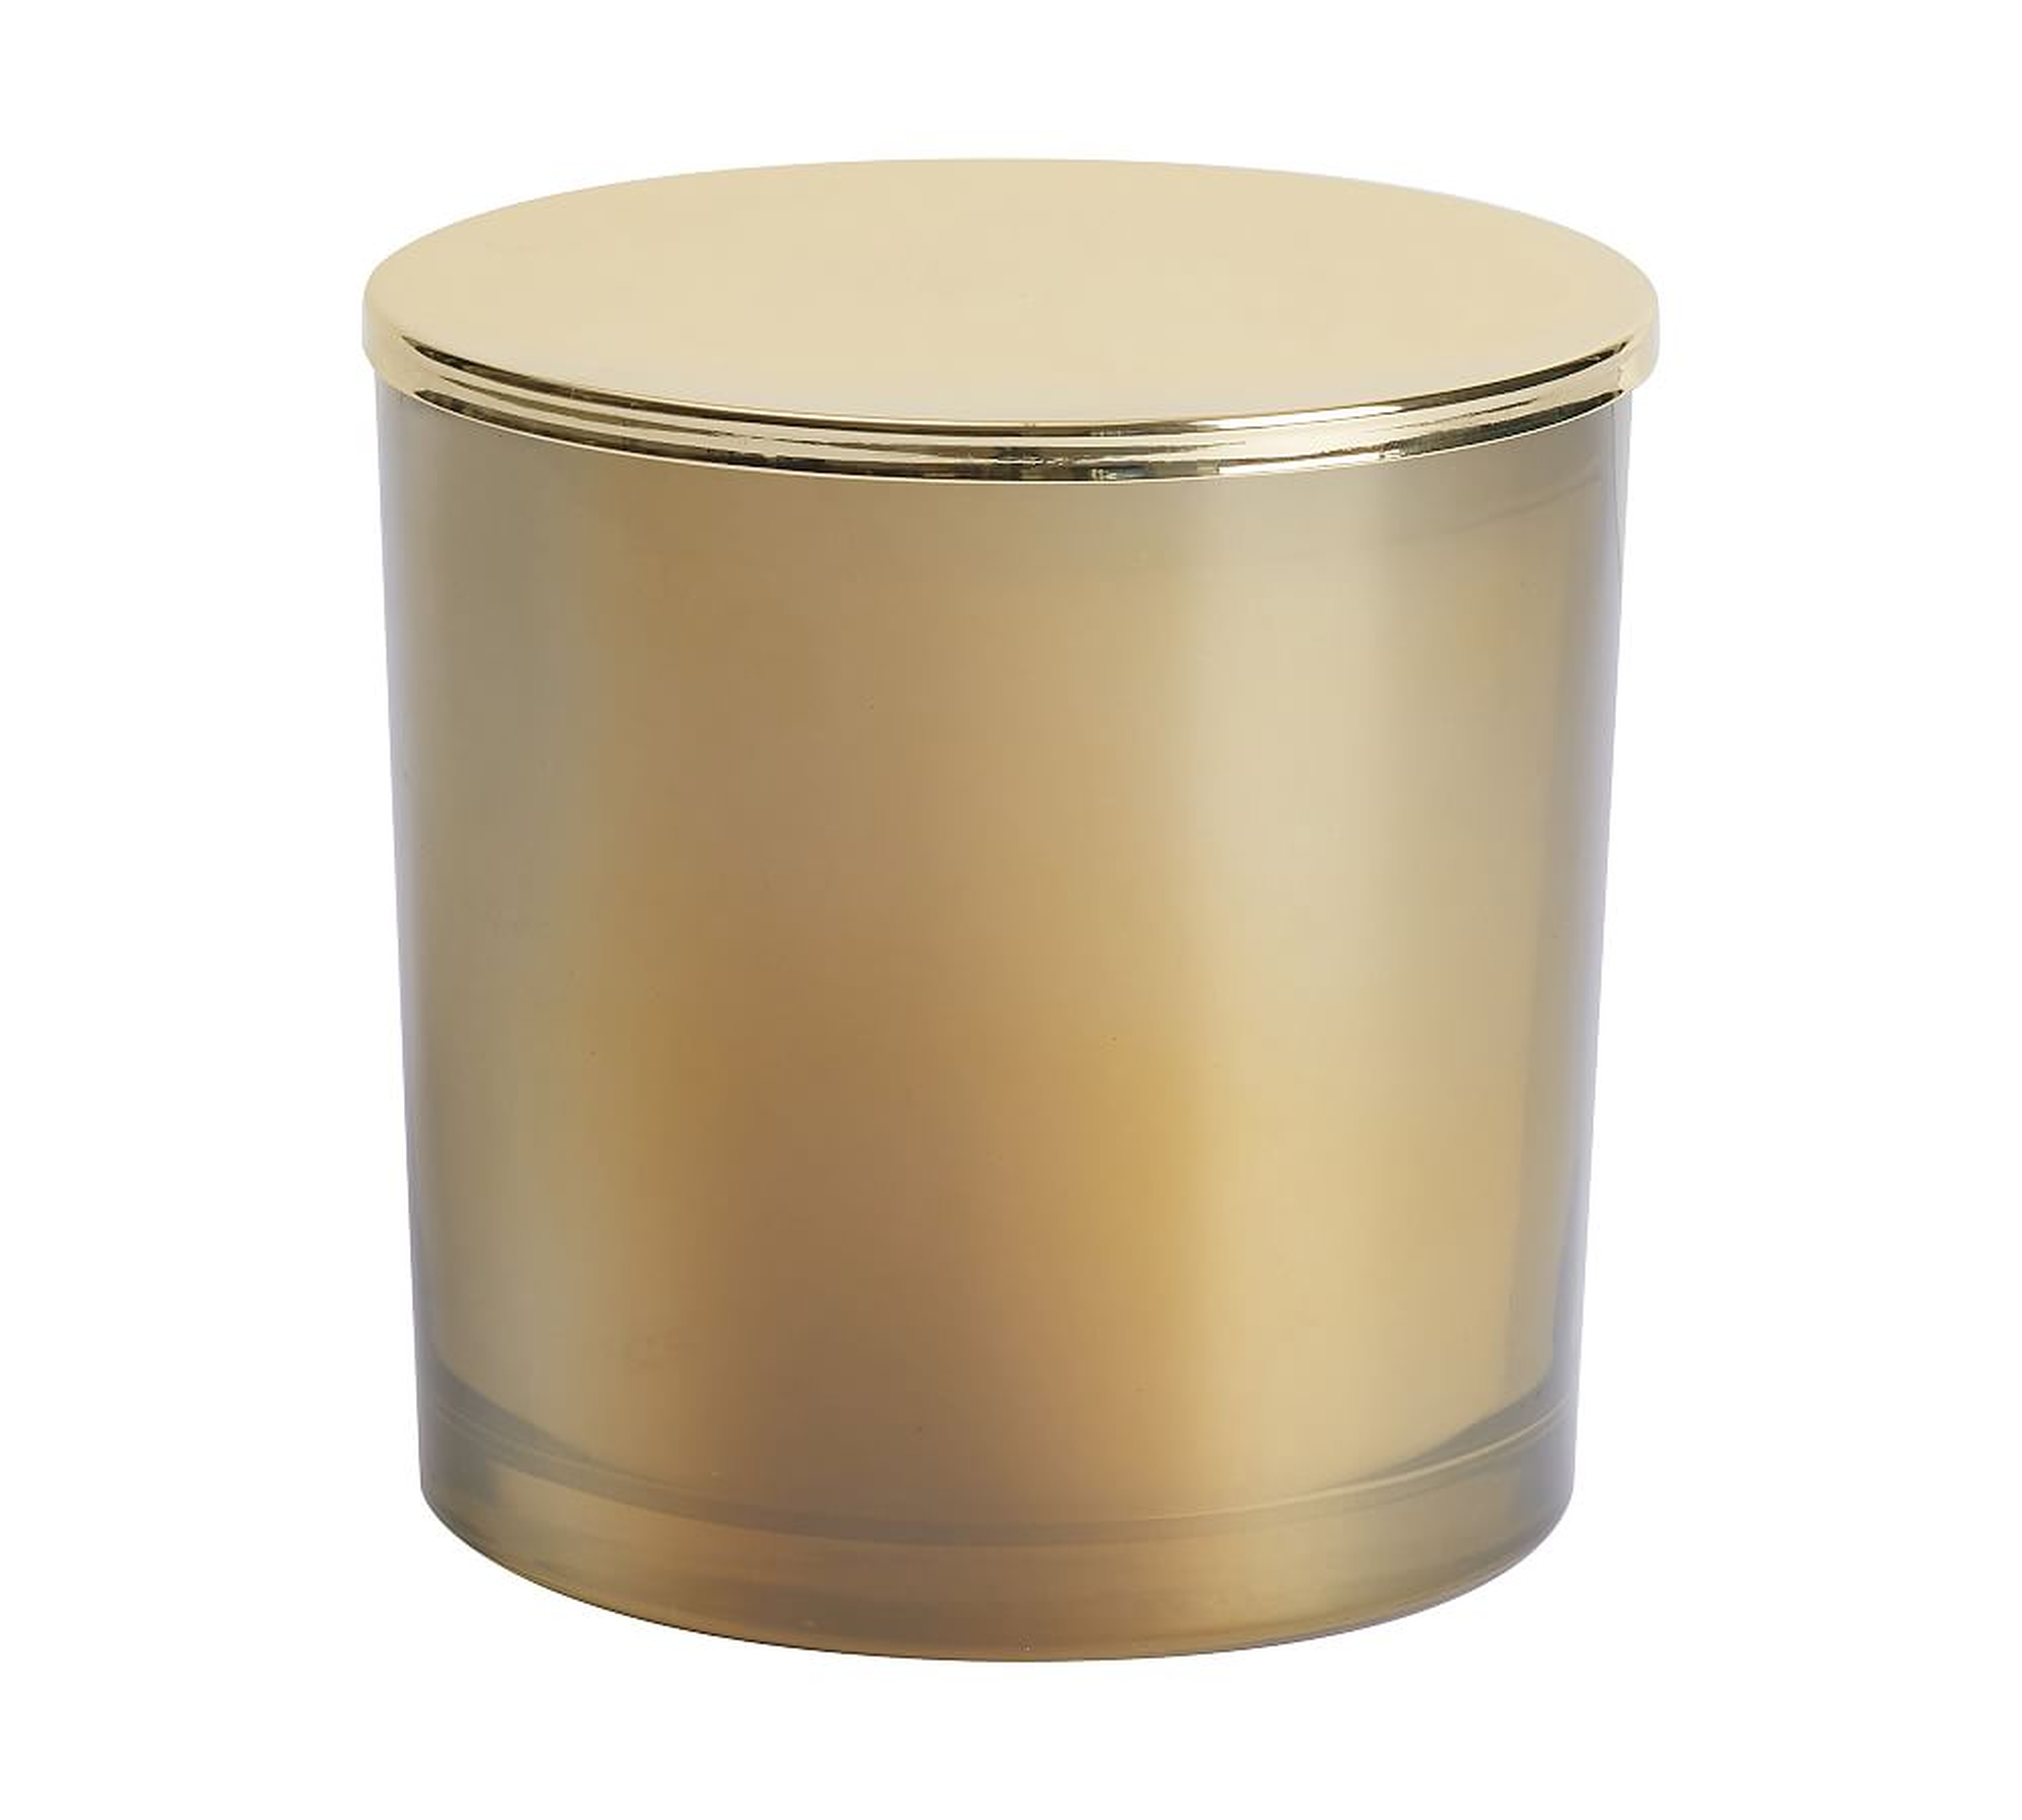 Champagne Cheer Scented Candle, Gold, Large with Lid, 24 oz. - Pottery Barn